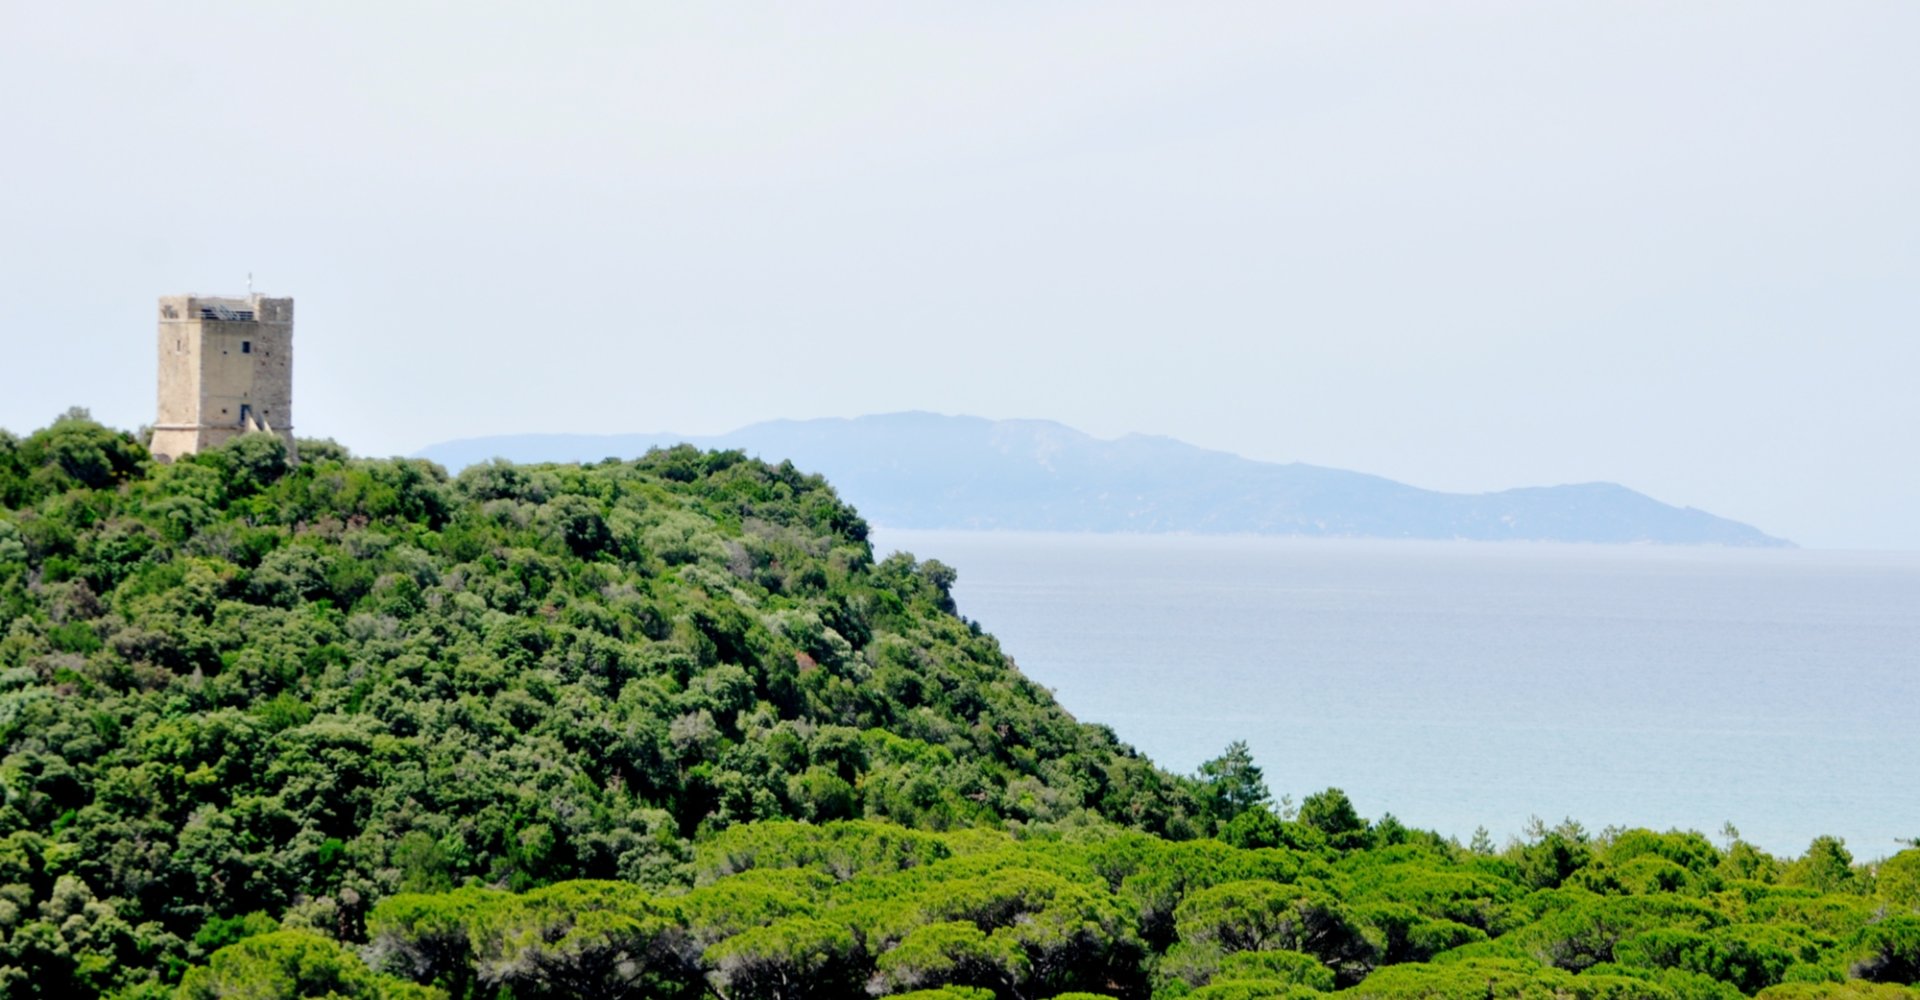 A glimpse of the Maremma Natural Park (ft tower)